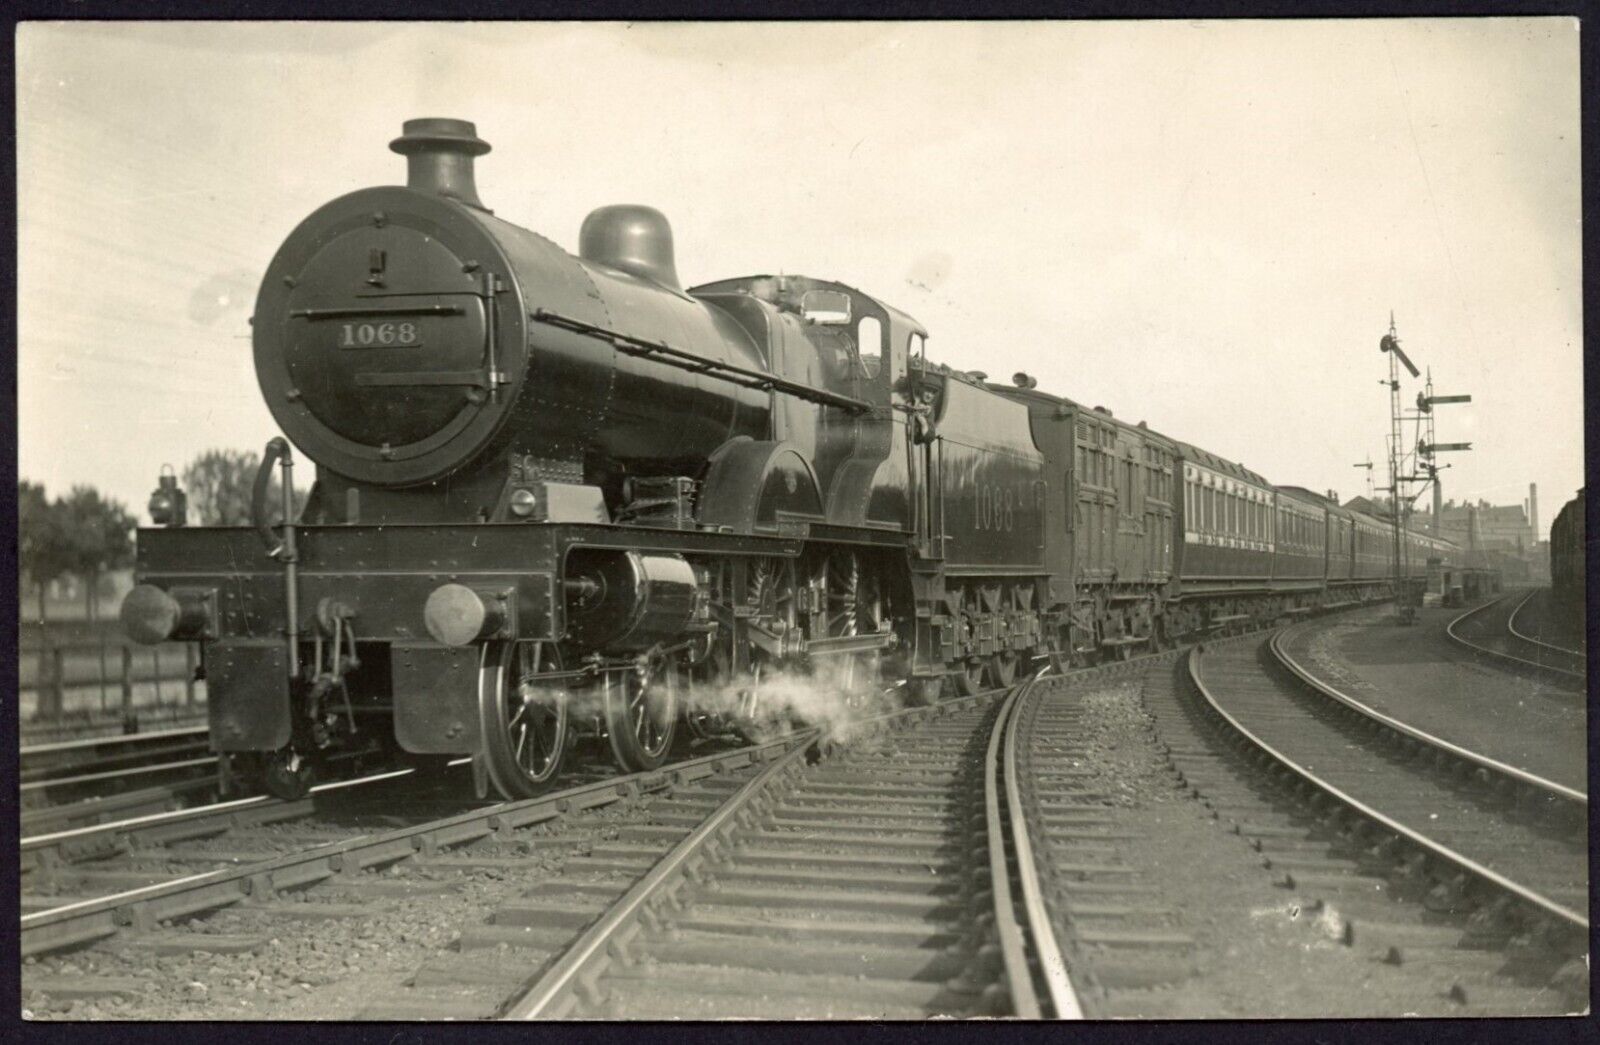 House Clearance - Railway RP service LMS  4-4-0 No. 1068 at Port Carlisle with a St. Enoch train